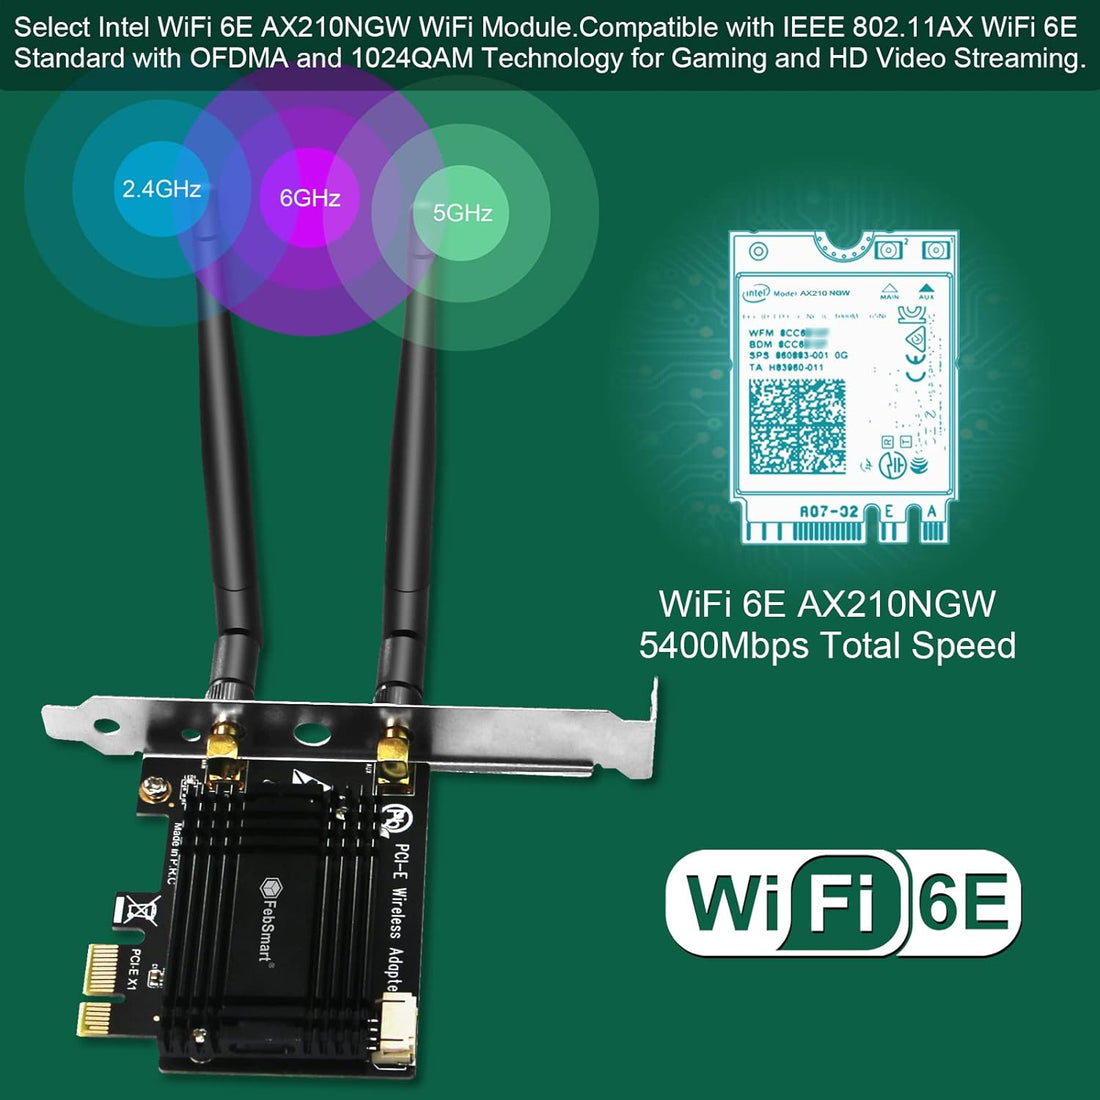 FebSmart WiFi 6E 5400Mbps PCIE WiFi Adapter for Windows 11, 10 64bit and Linux Kernel 5.1+ Desktop PCs, 2.4GHz 574Mbps, 5GHz 2400Mbps and 6GHz 2400Mbps, Intel WiFi 6E AX210NGW, PCIE WiFi Card (AX5400)